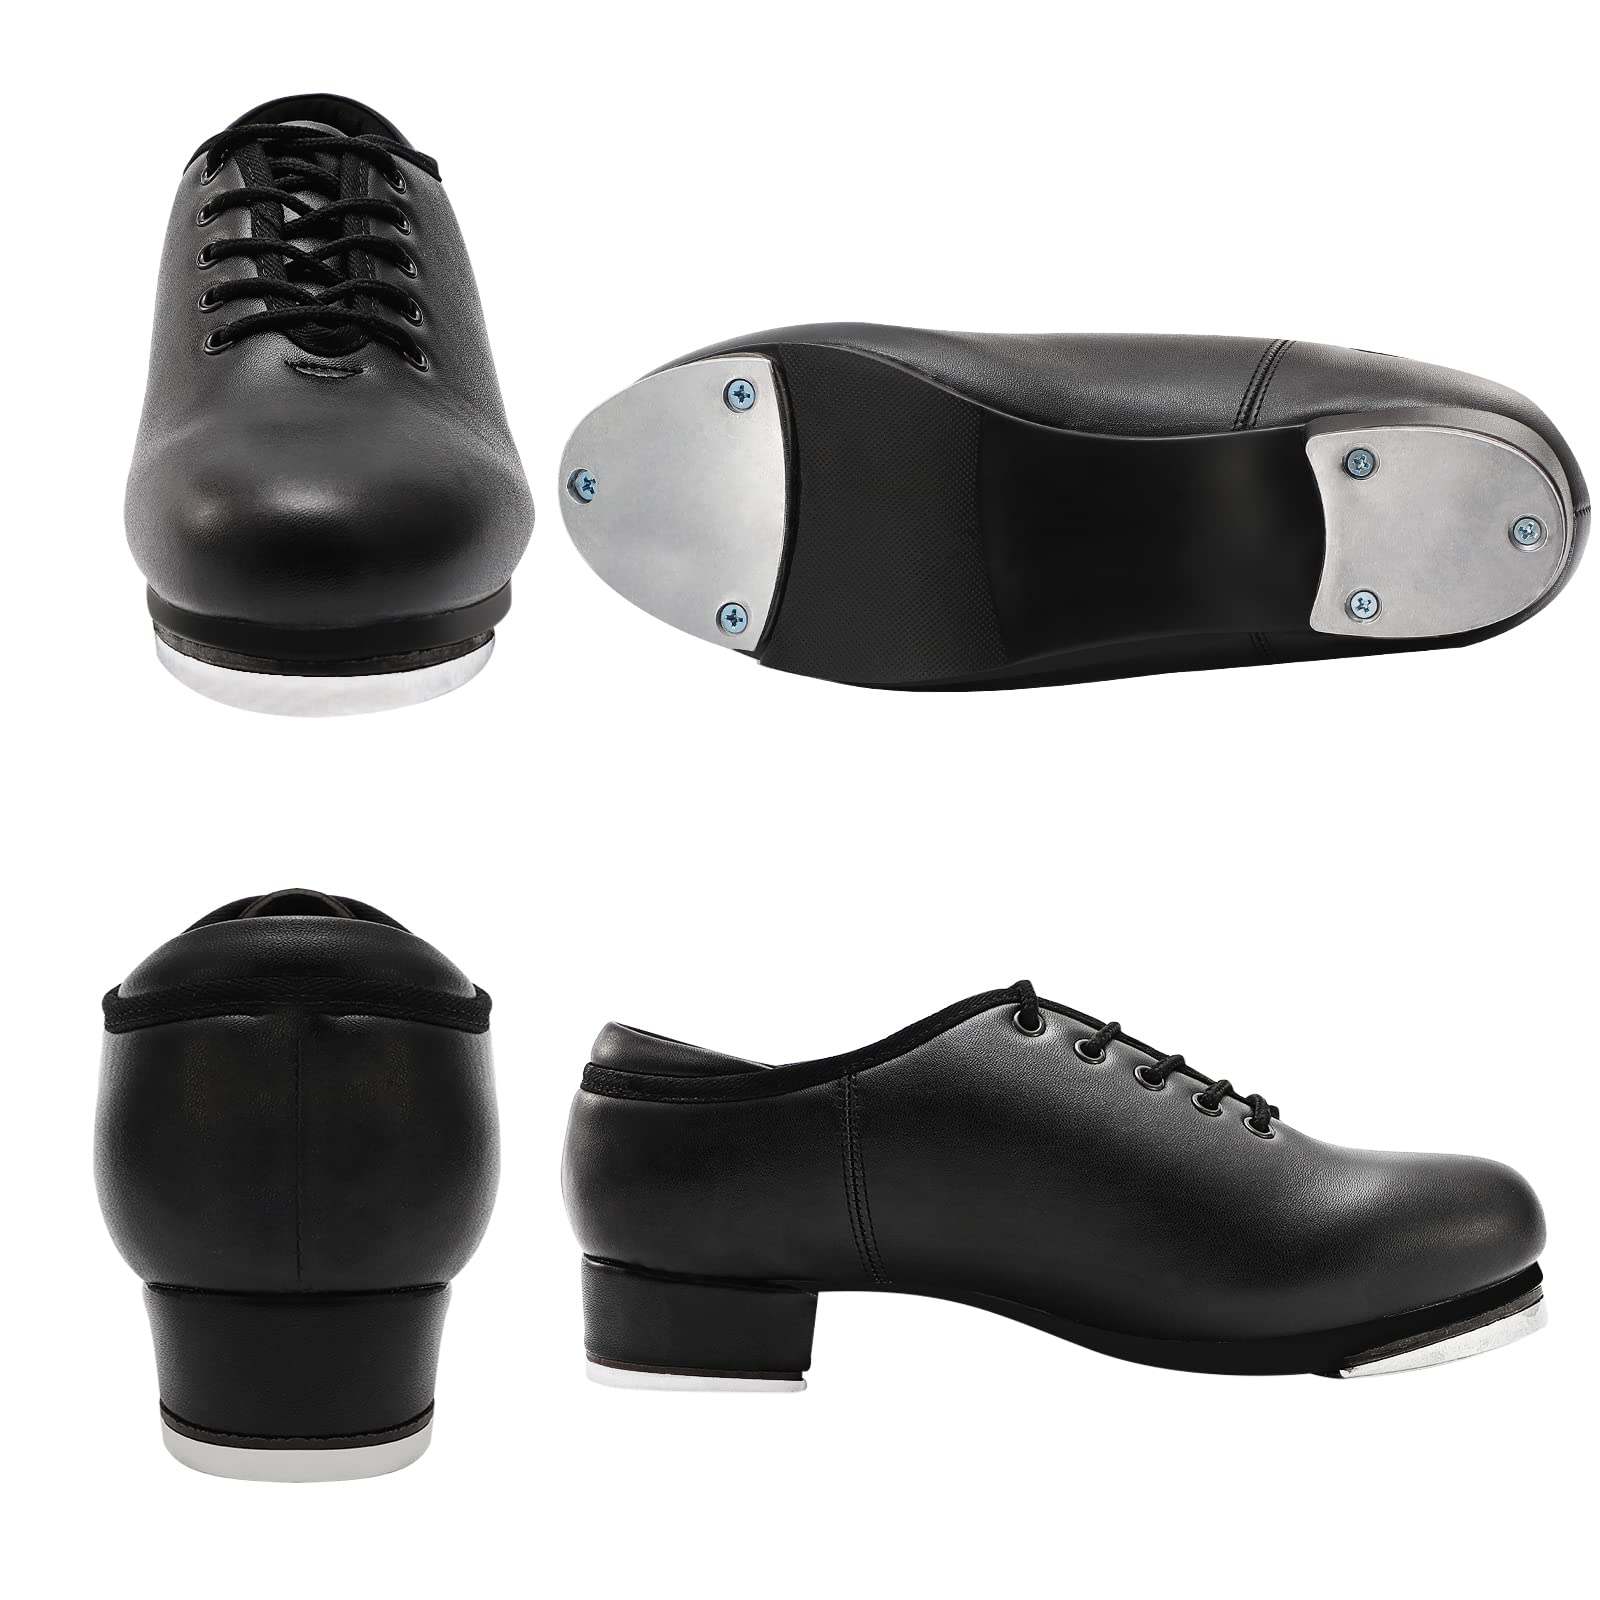 Child Jazz Tap Dance Shoes for Unisex Girls and Boys (Toddler/Little Kid/Big Kid)